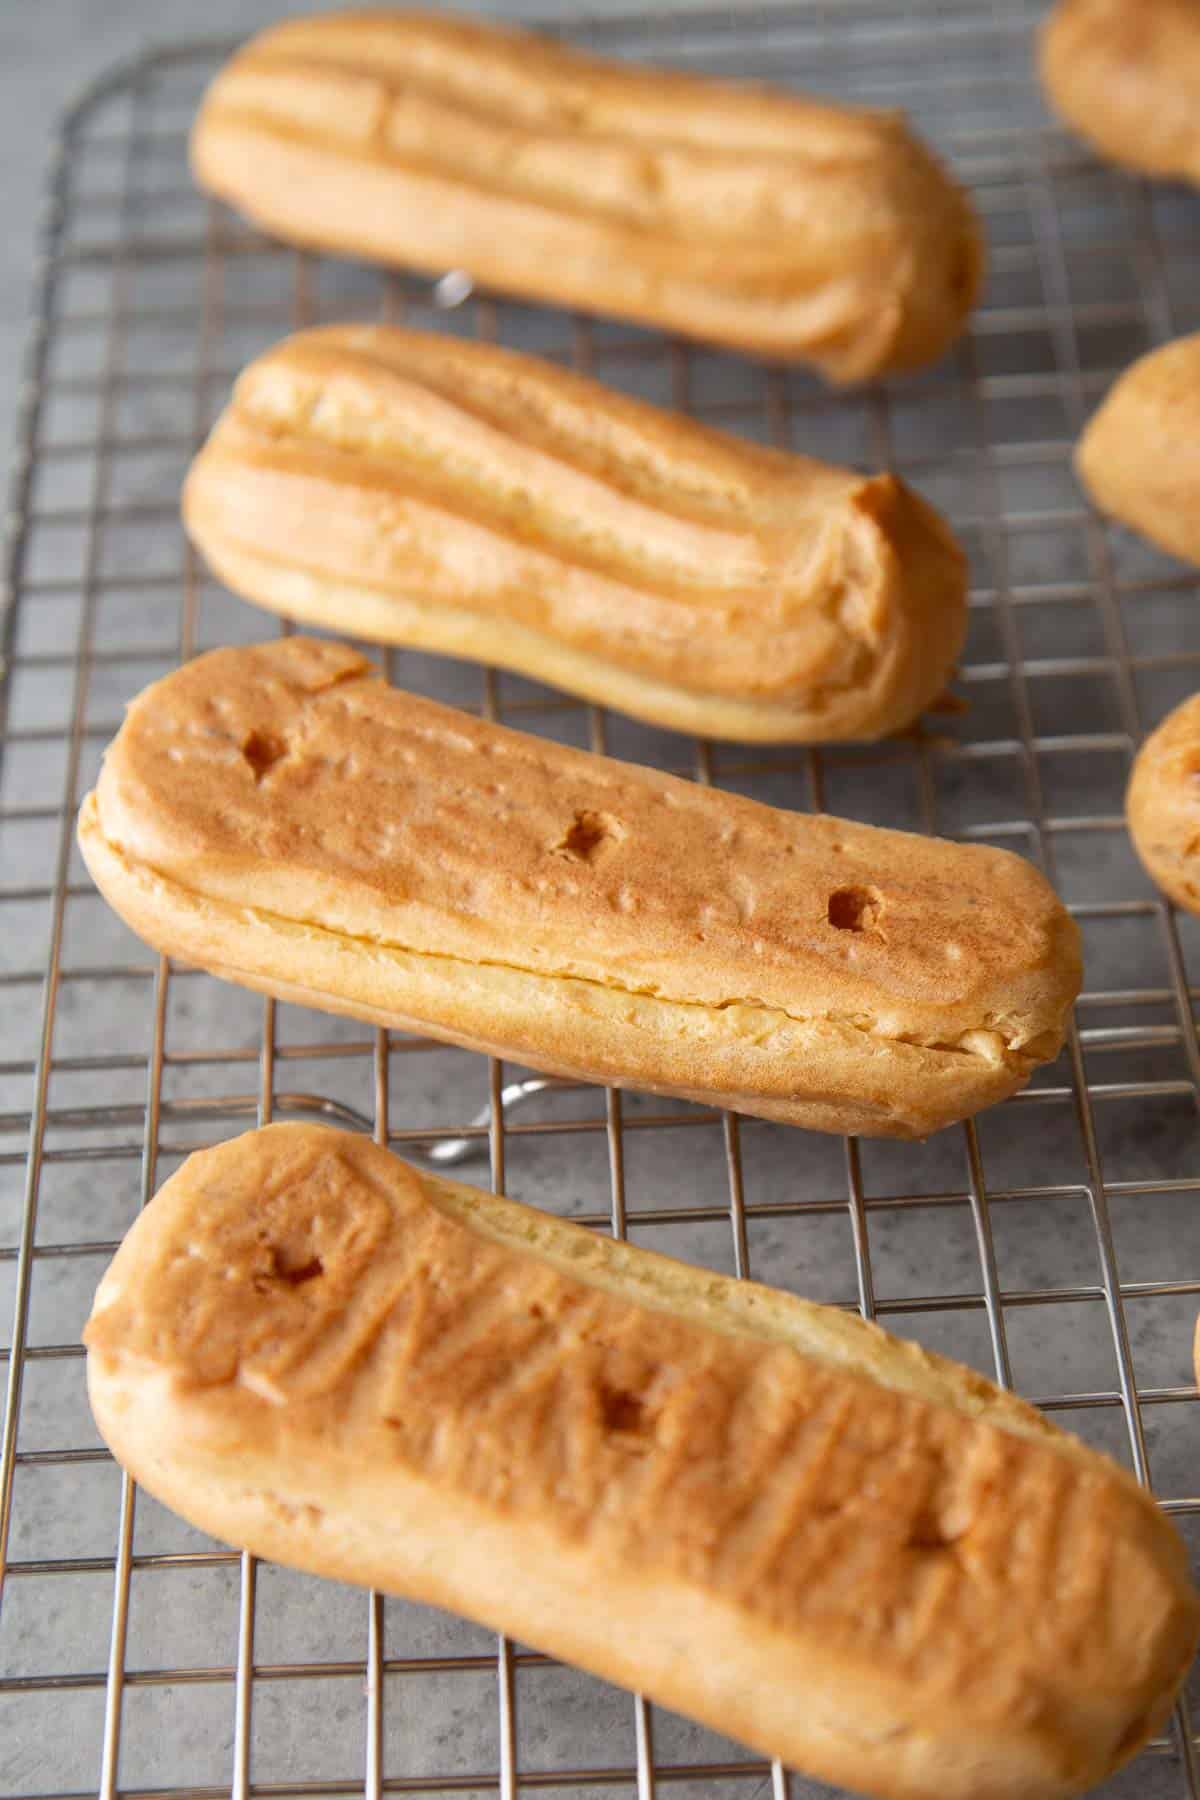 poke three holes on the bottom of eclair and fill with pastry cream.